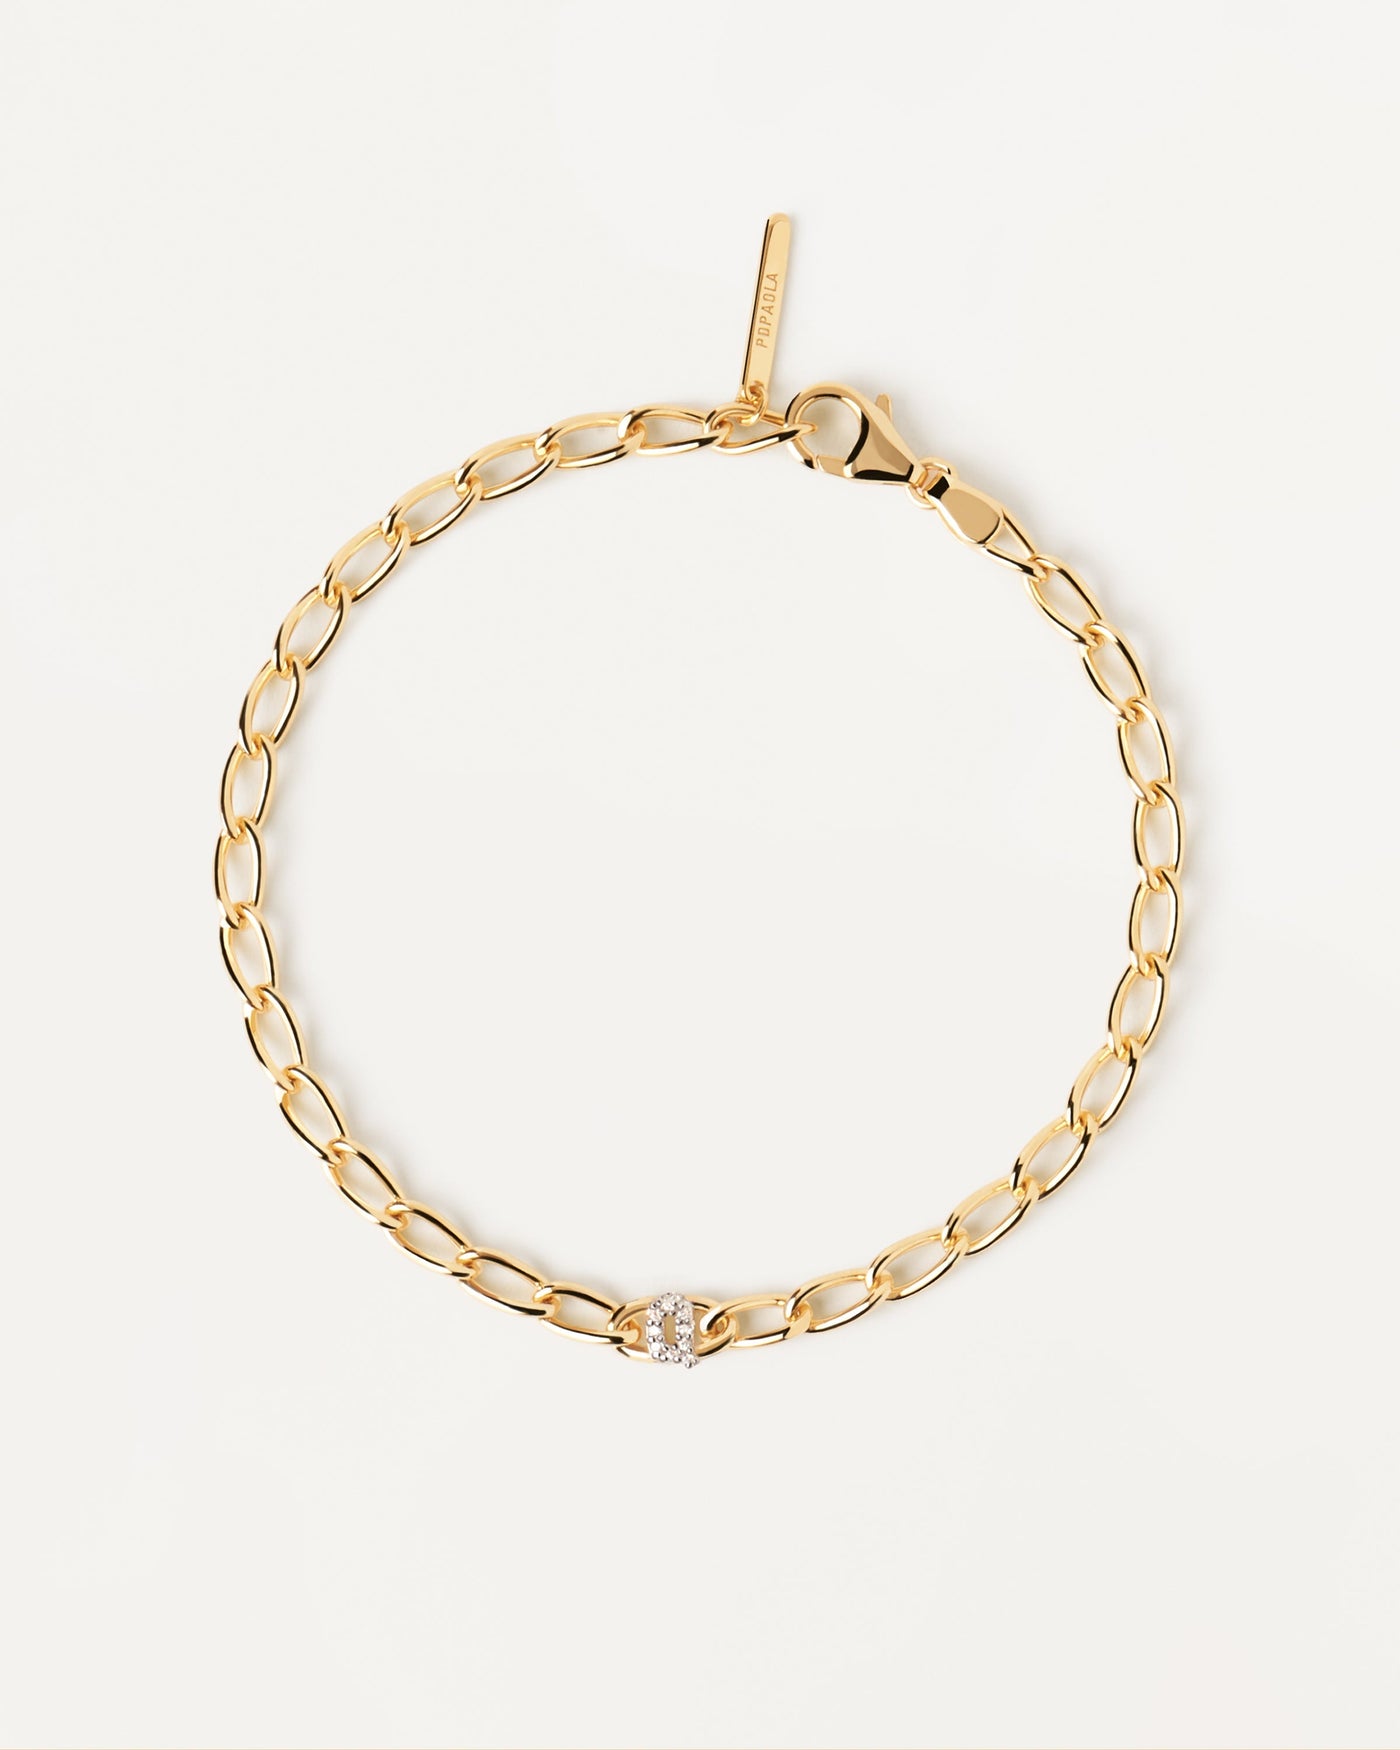 2023 Selection | Letter Q Chain Bracelet. cable chain bracelet in gold-plated silver with initial Q in zirconia. Get the latest arrival from PDPAOLA. Place your order safely and get this Best Seller. Free Shipping.